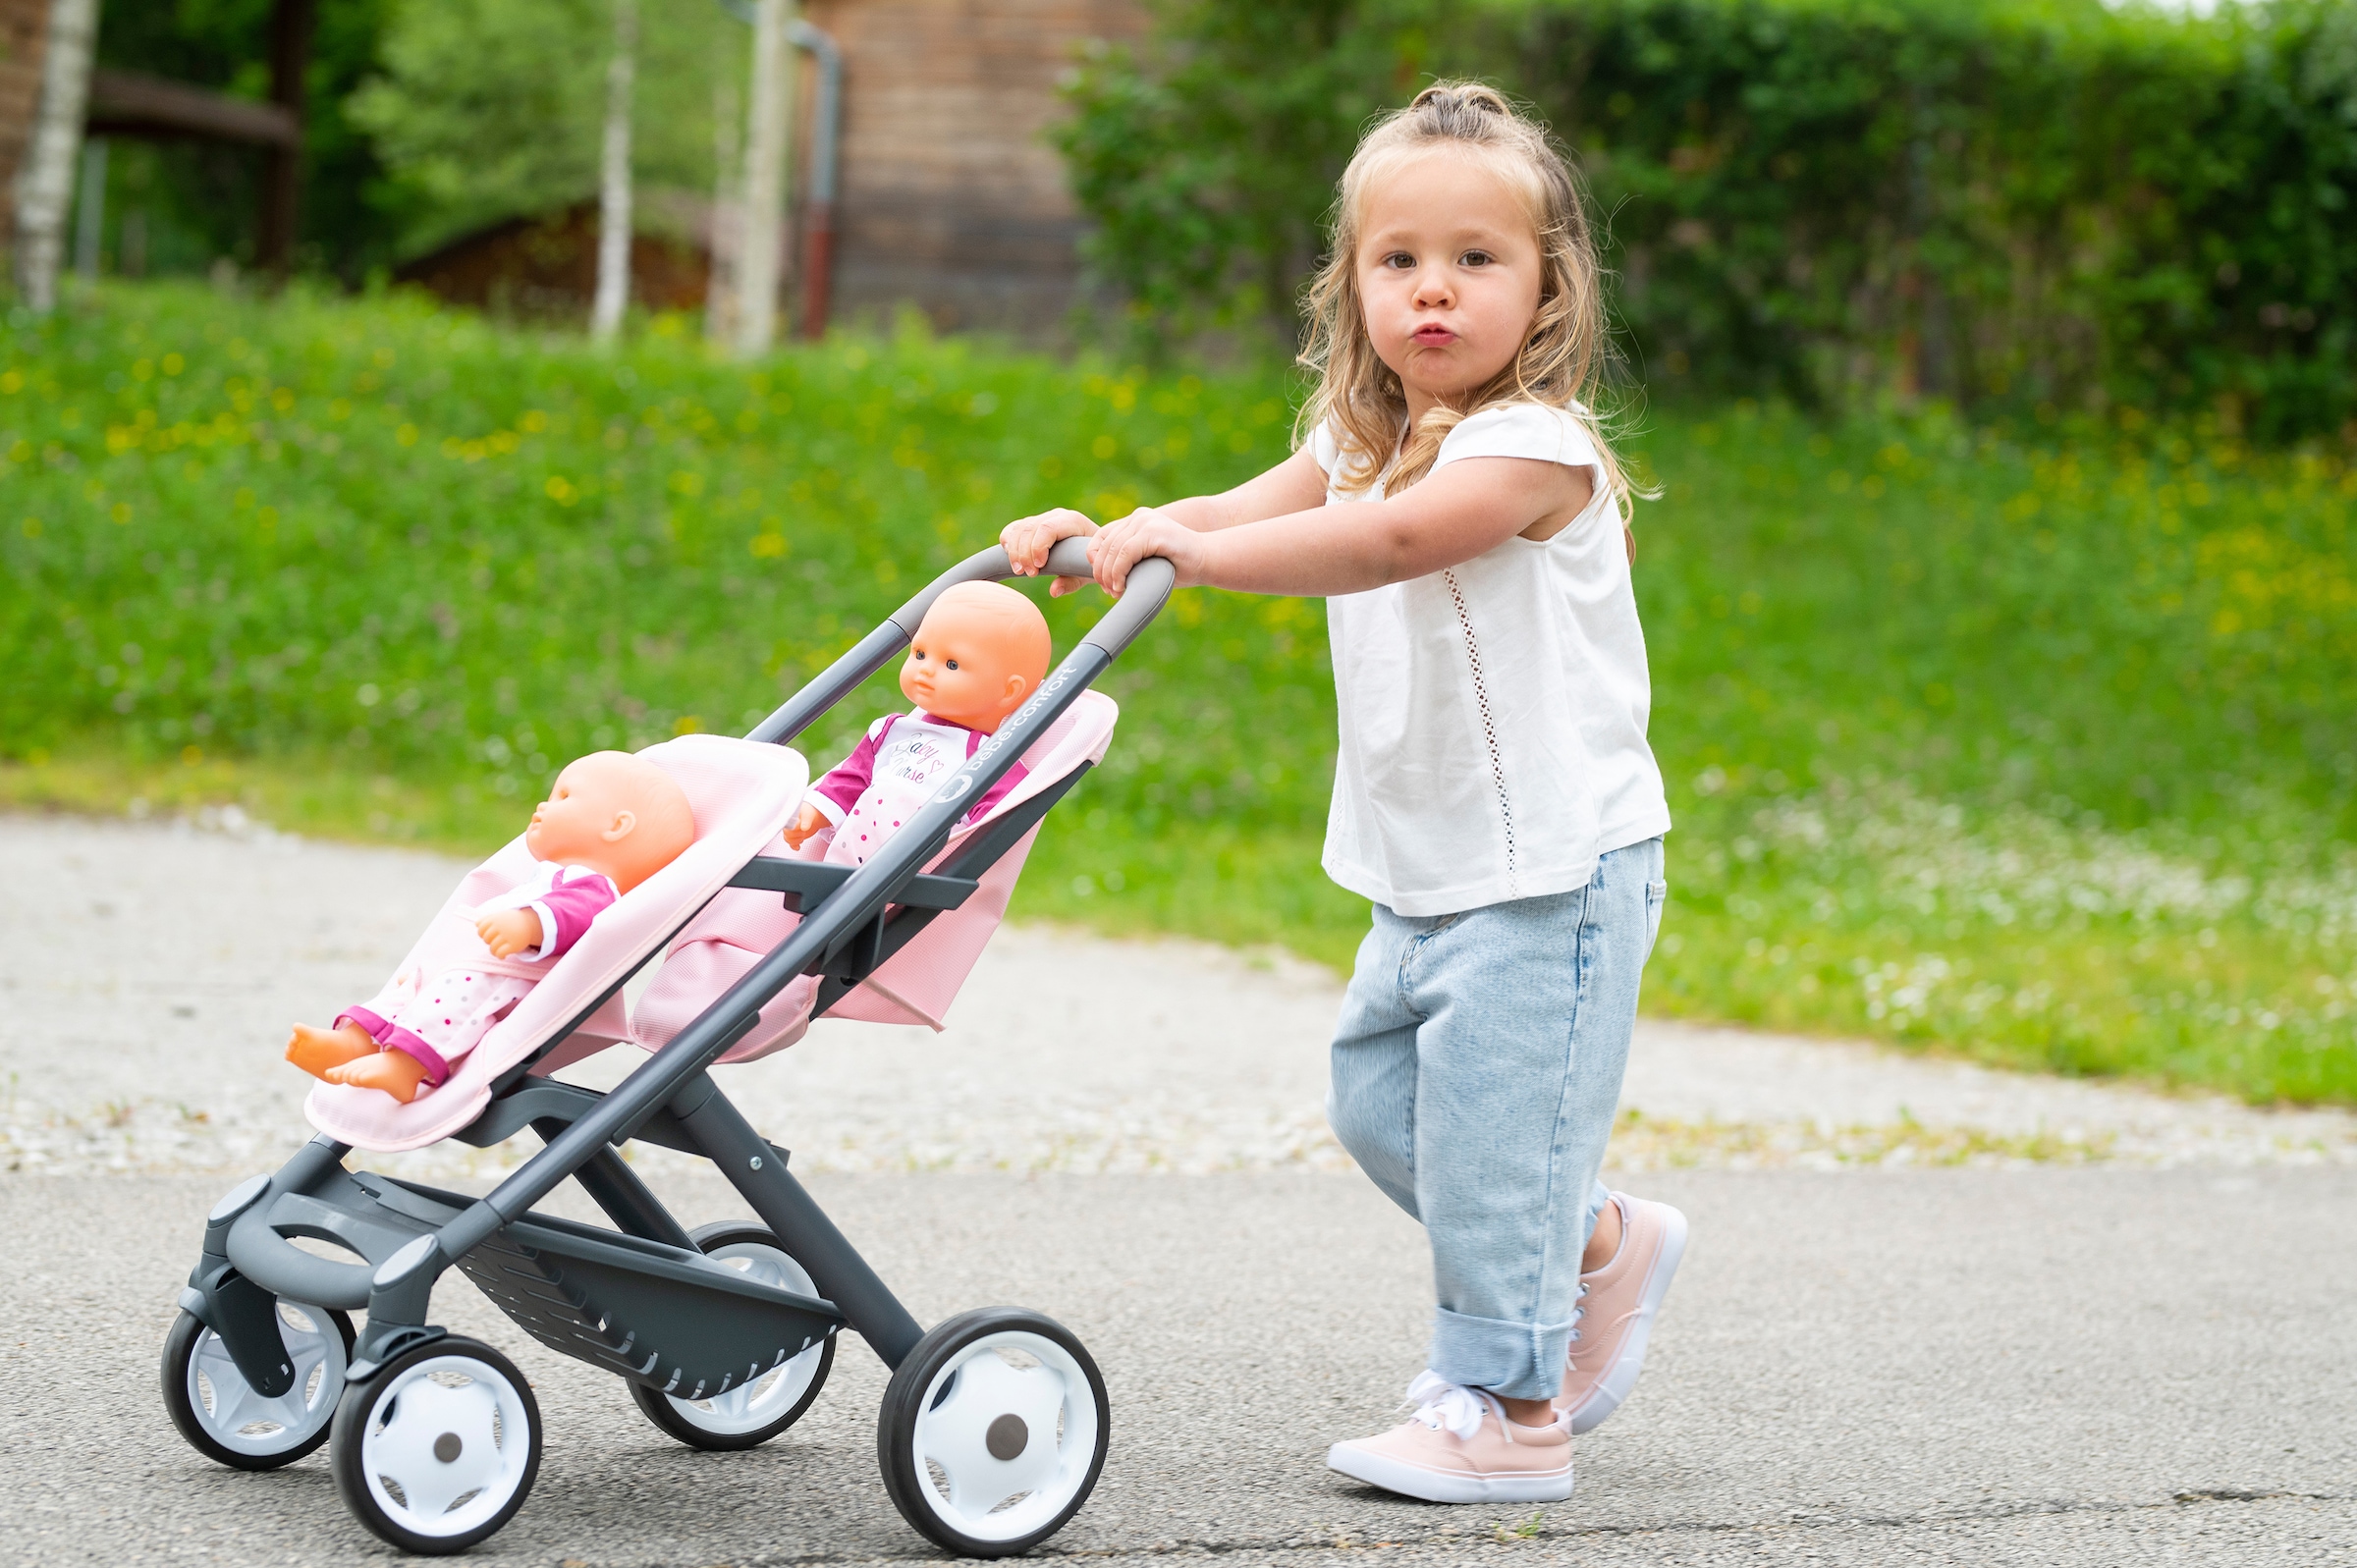 Smoby Puppen-Zwillingsbuggy »Quinny«, Made in Europe